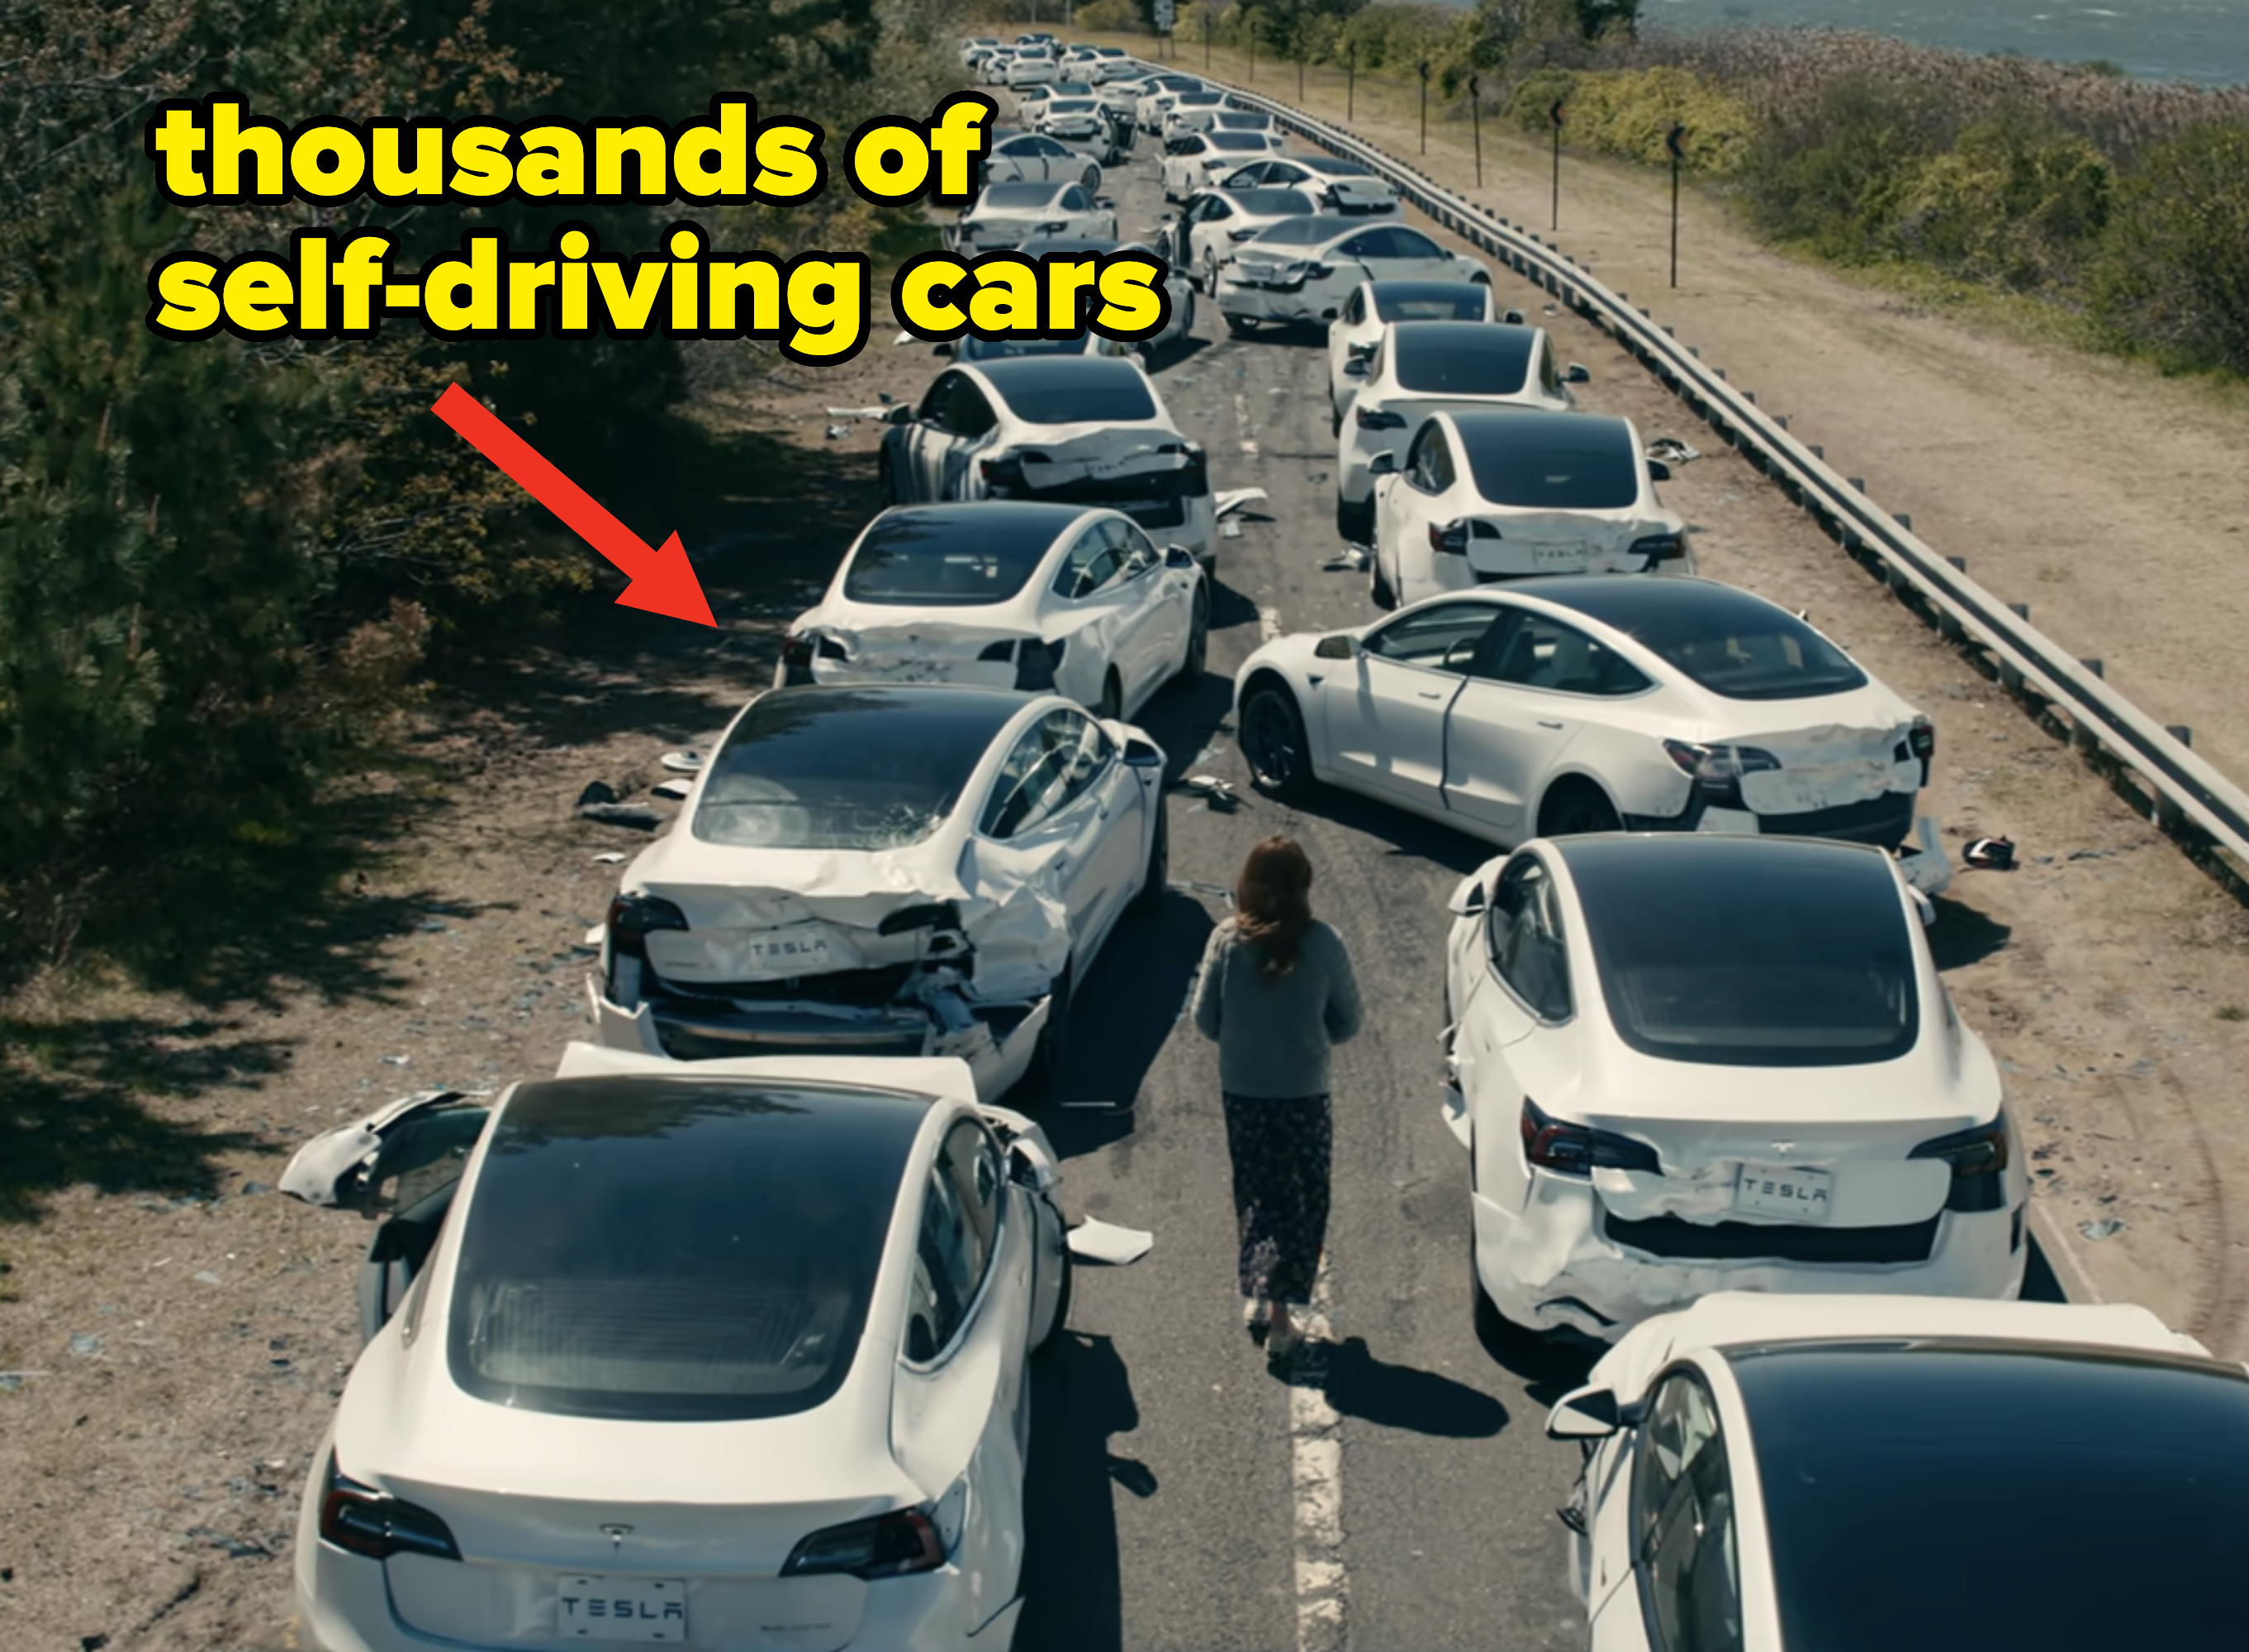 a line of self-driving cards that crashed